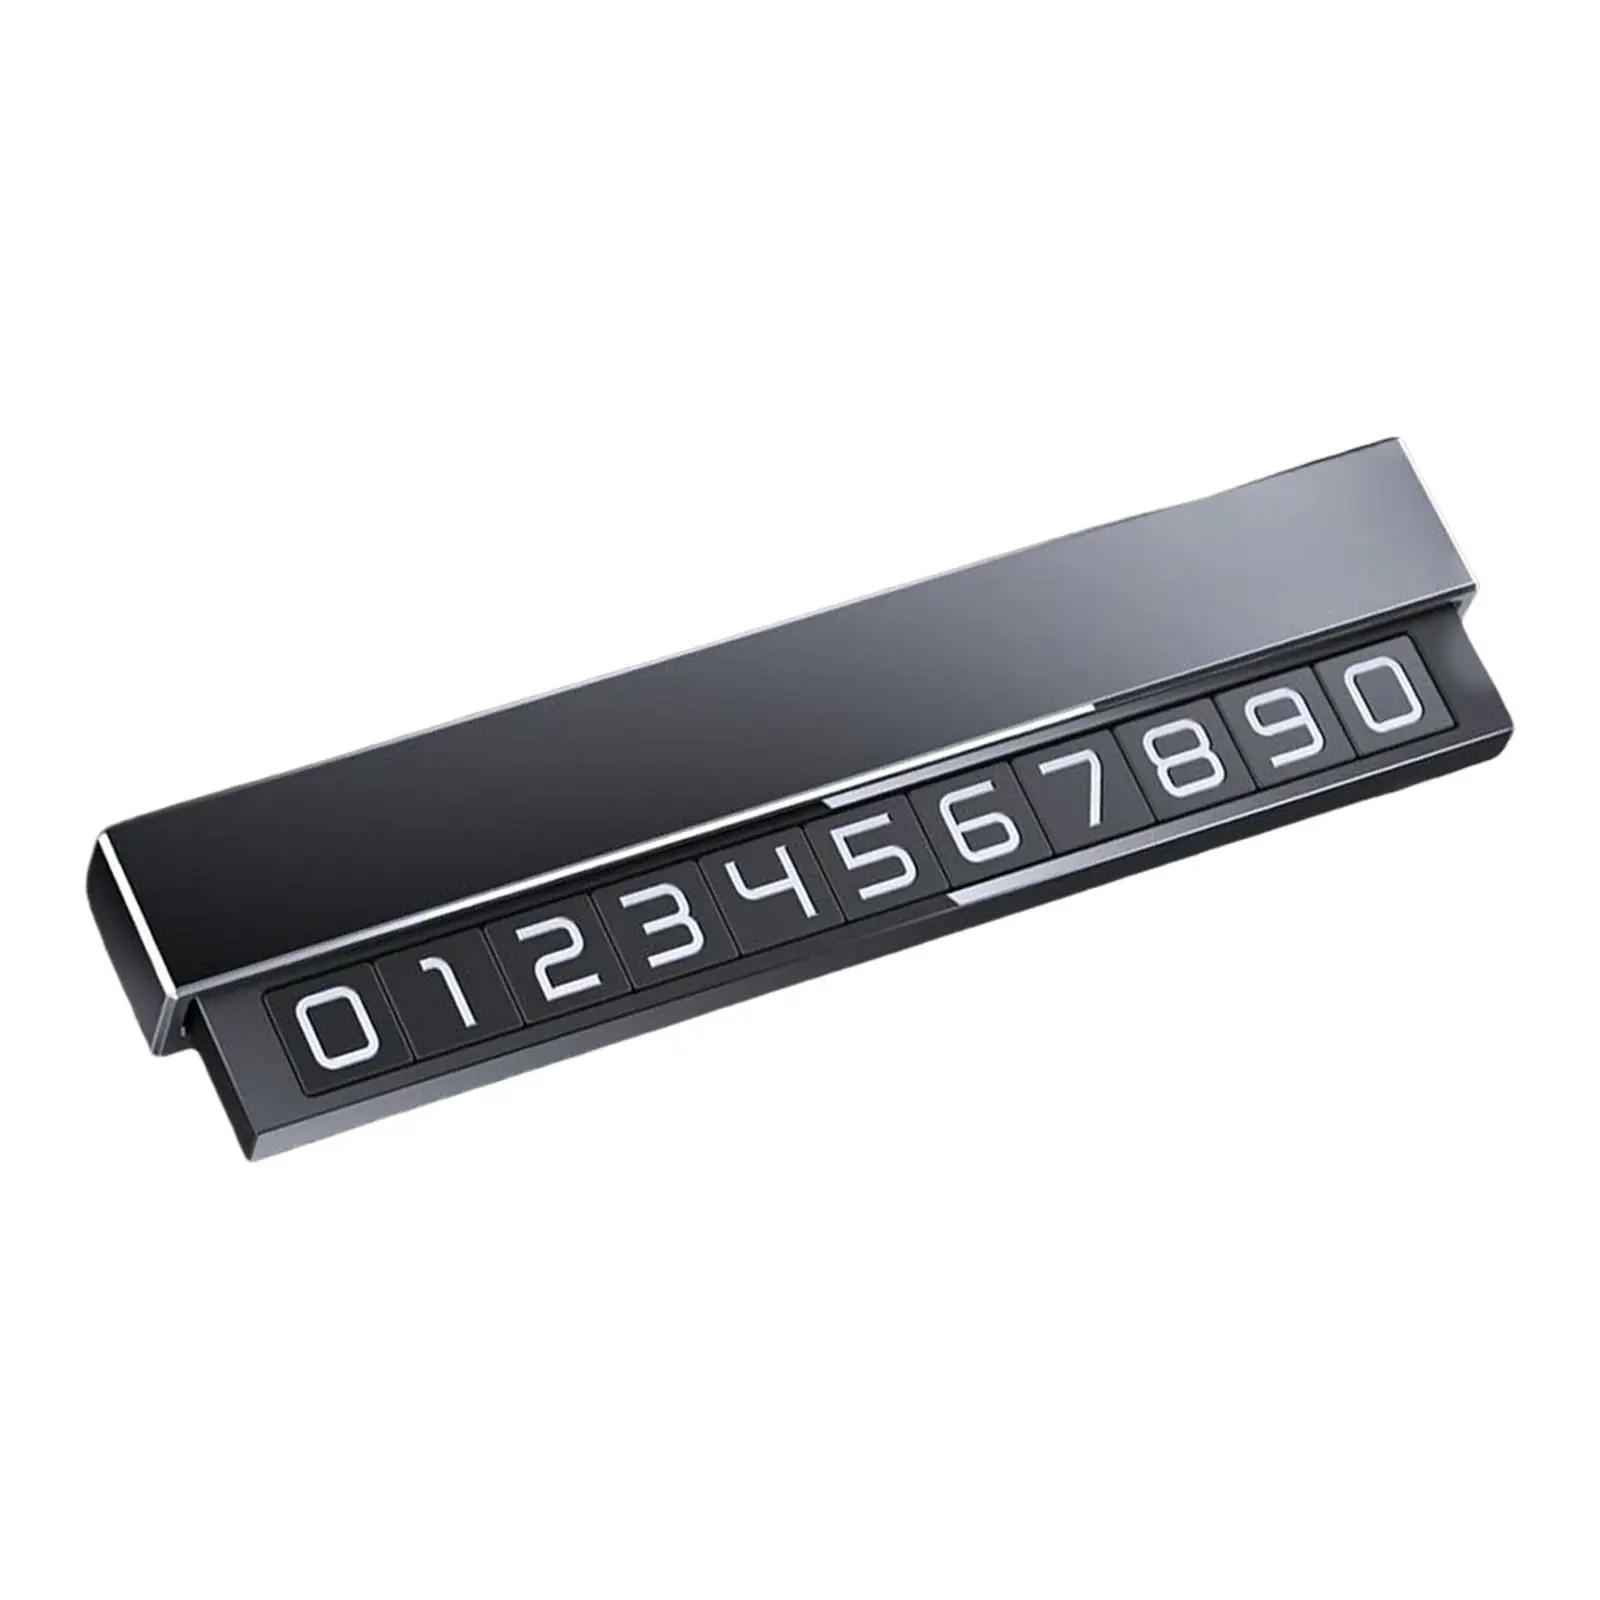 Parking Number Plate Car Decoration Accessories Phone Number Card Plate for Cars Dashboard